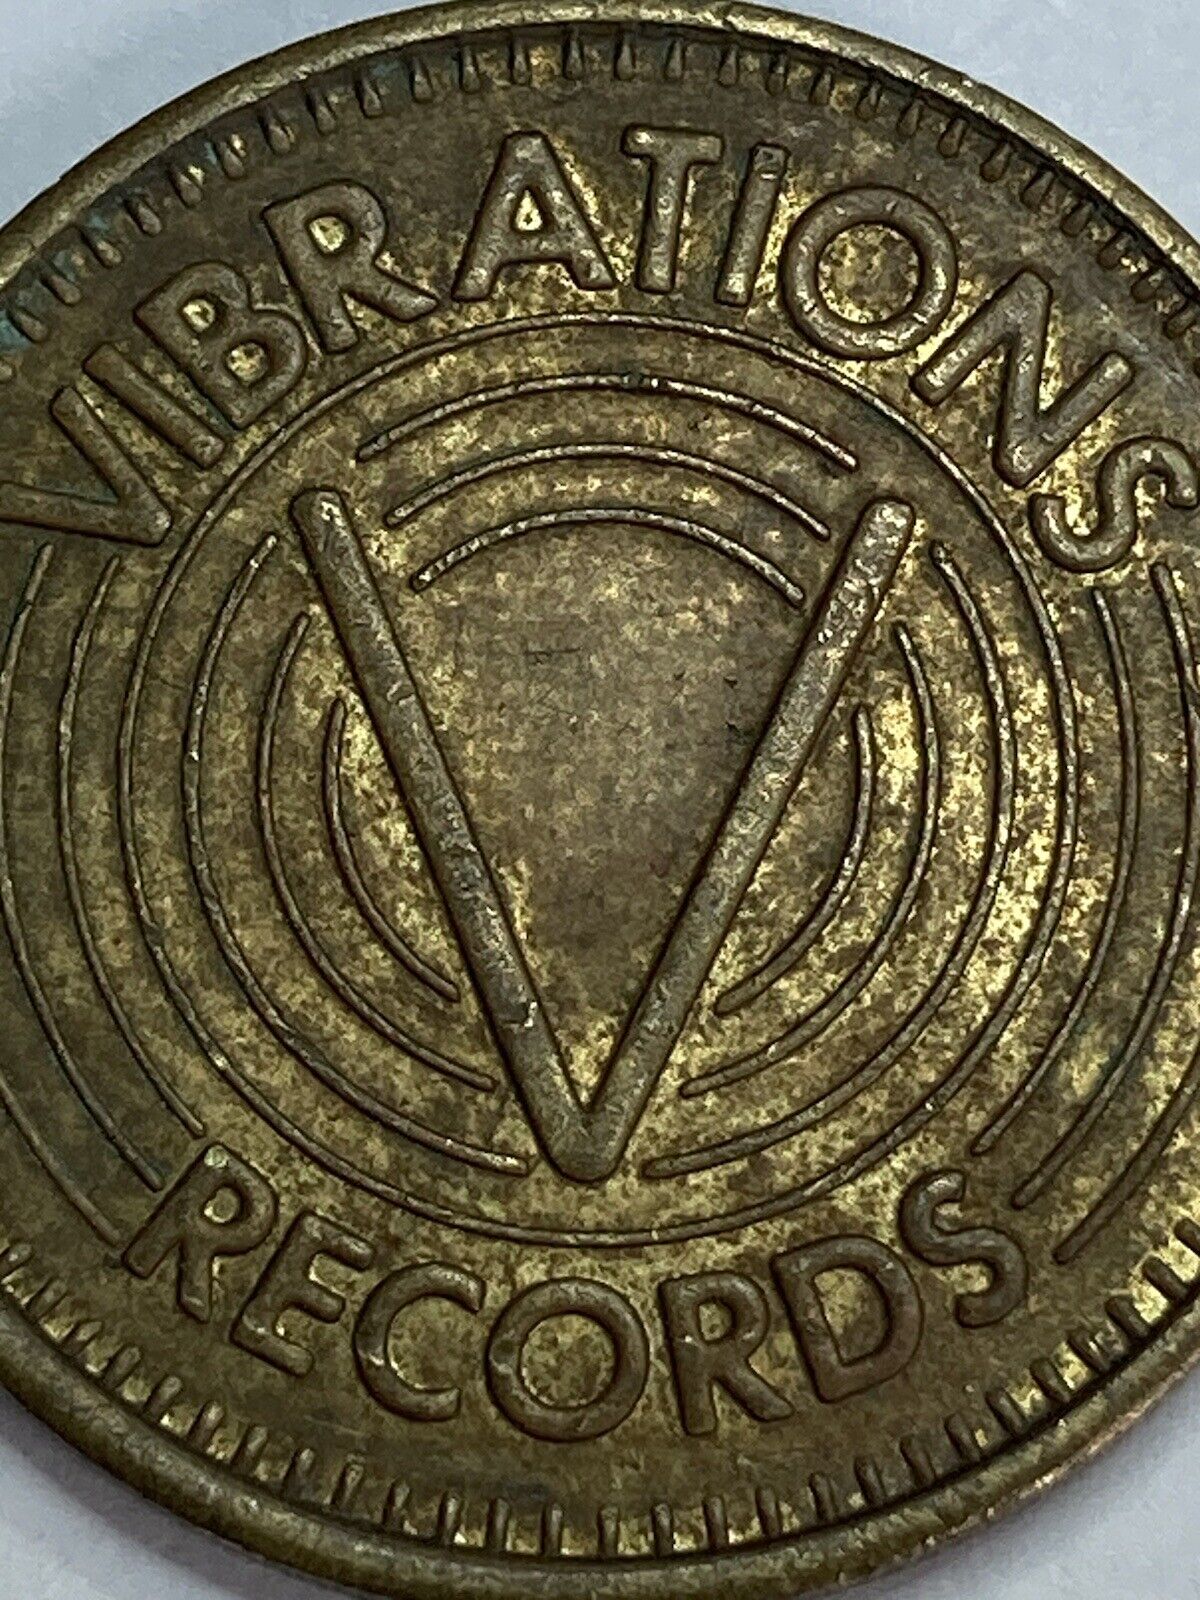 VINTAGE VIBRATIONS RECORDS TOKEN - BRASS - FOR REPLAY ONLY - LOOK